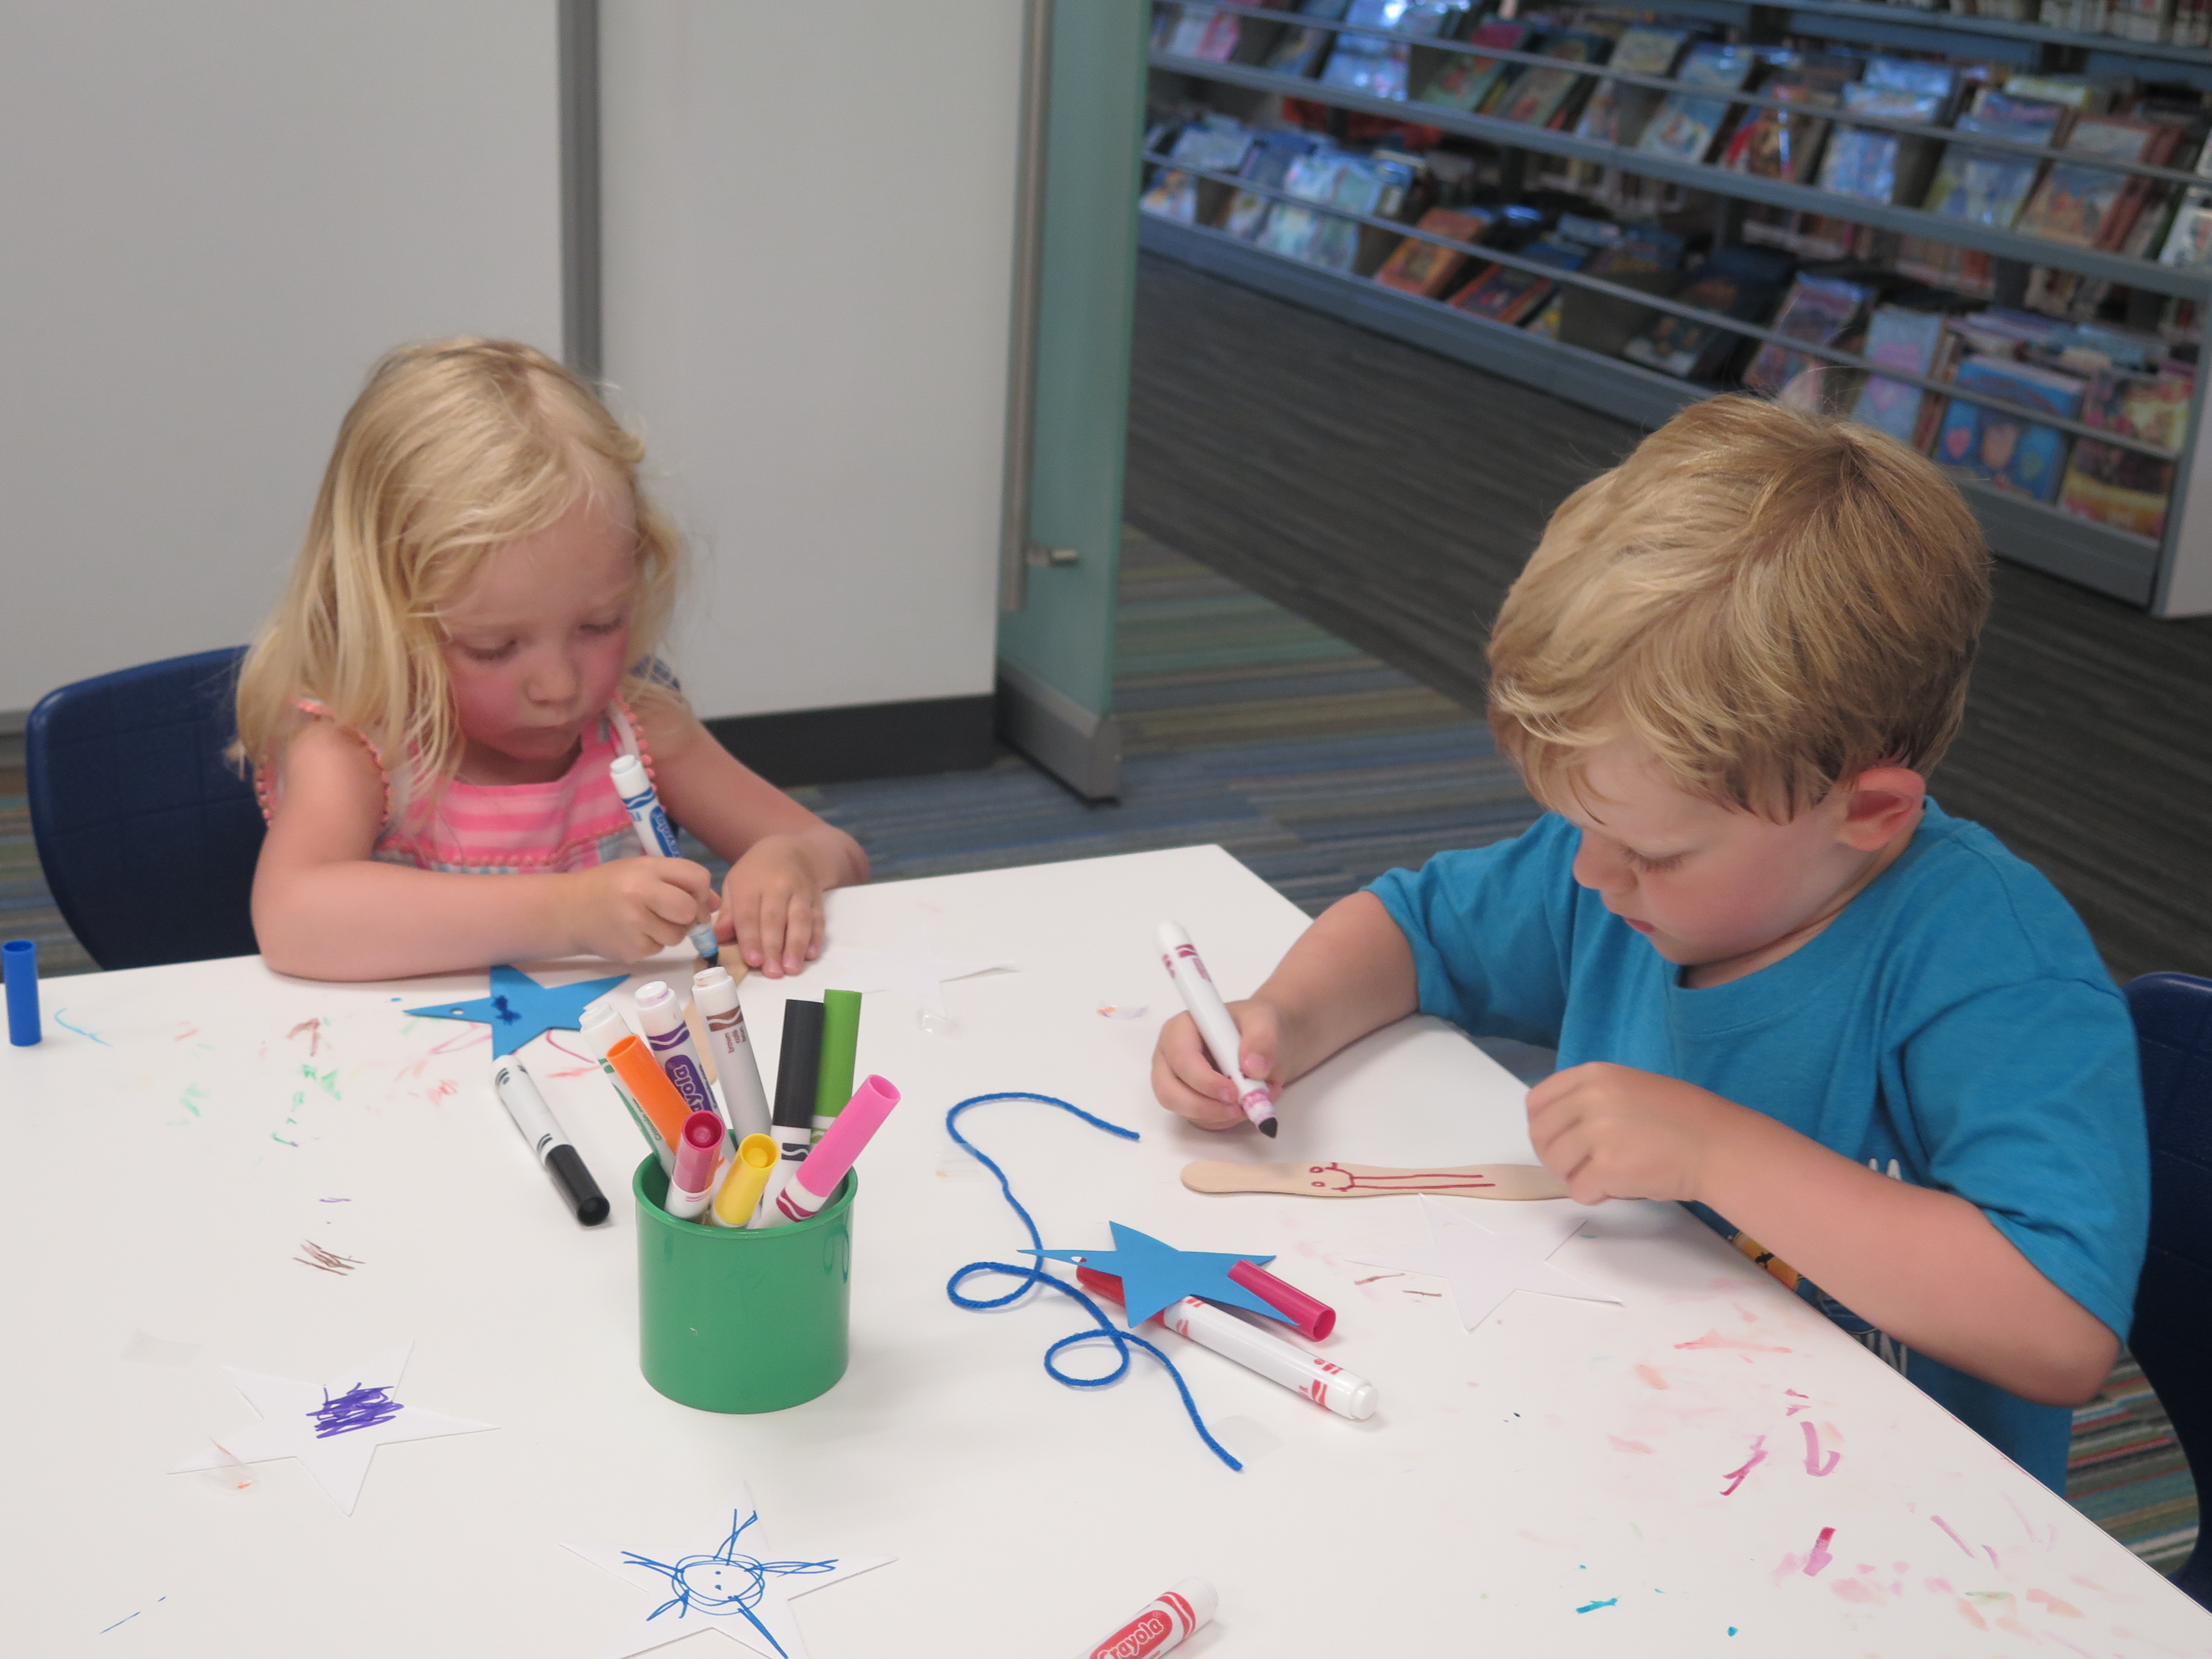 Two children draw and color on paper while seated